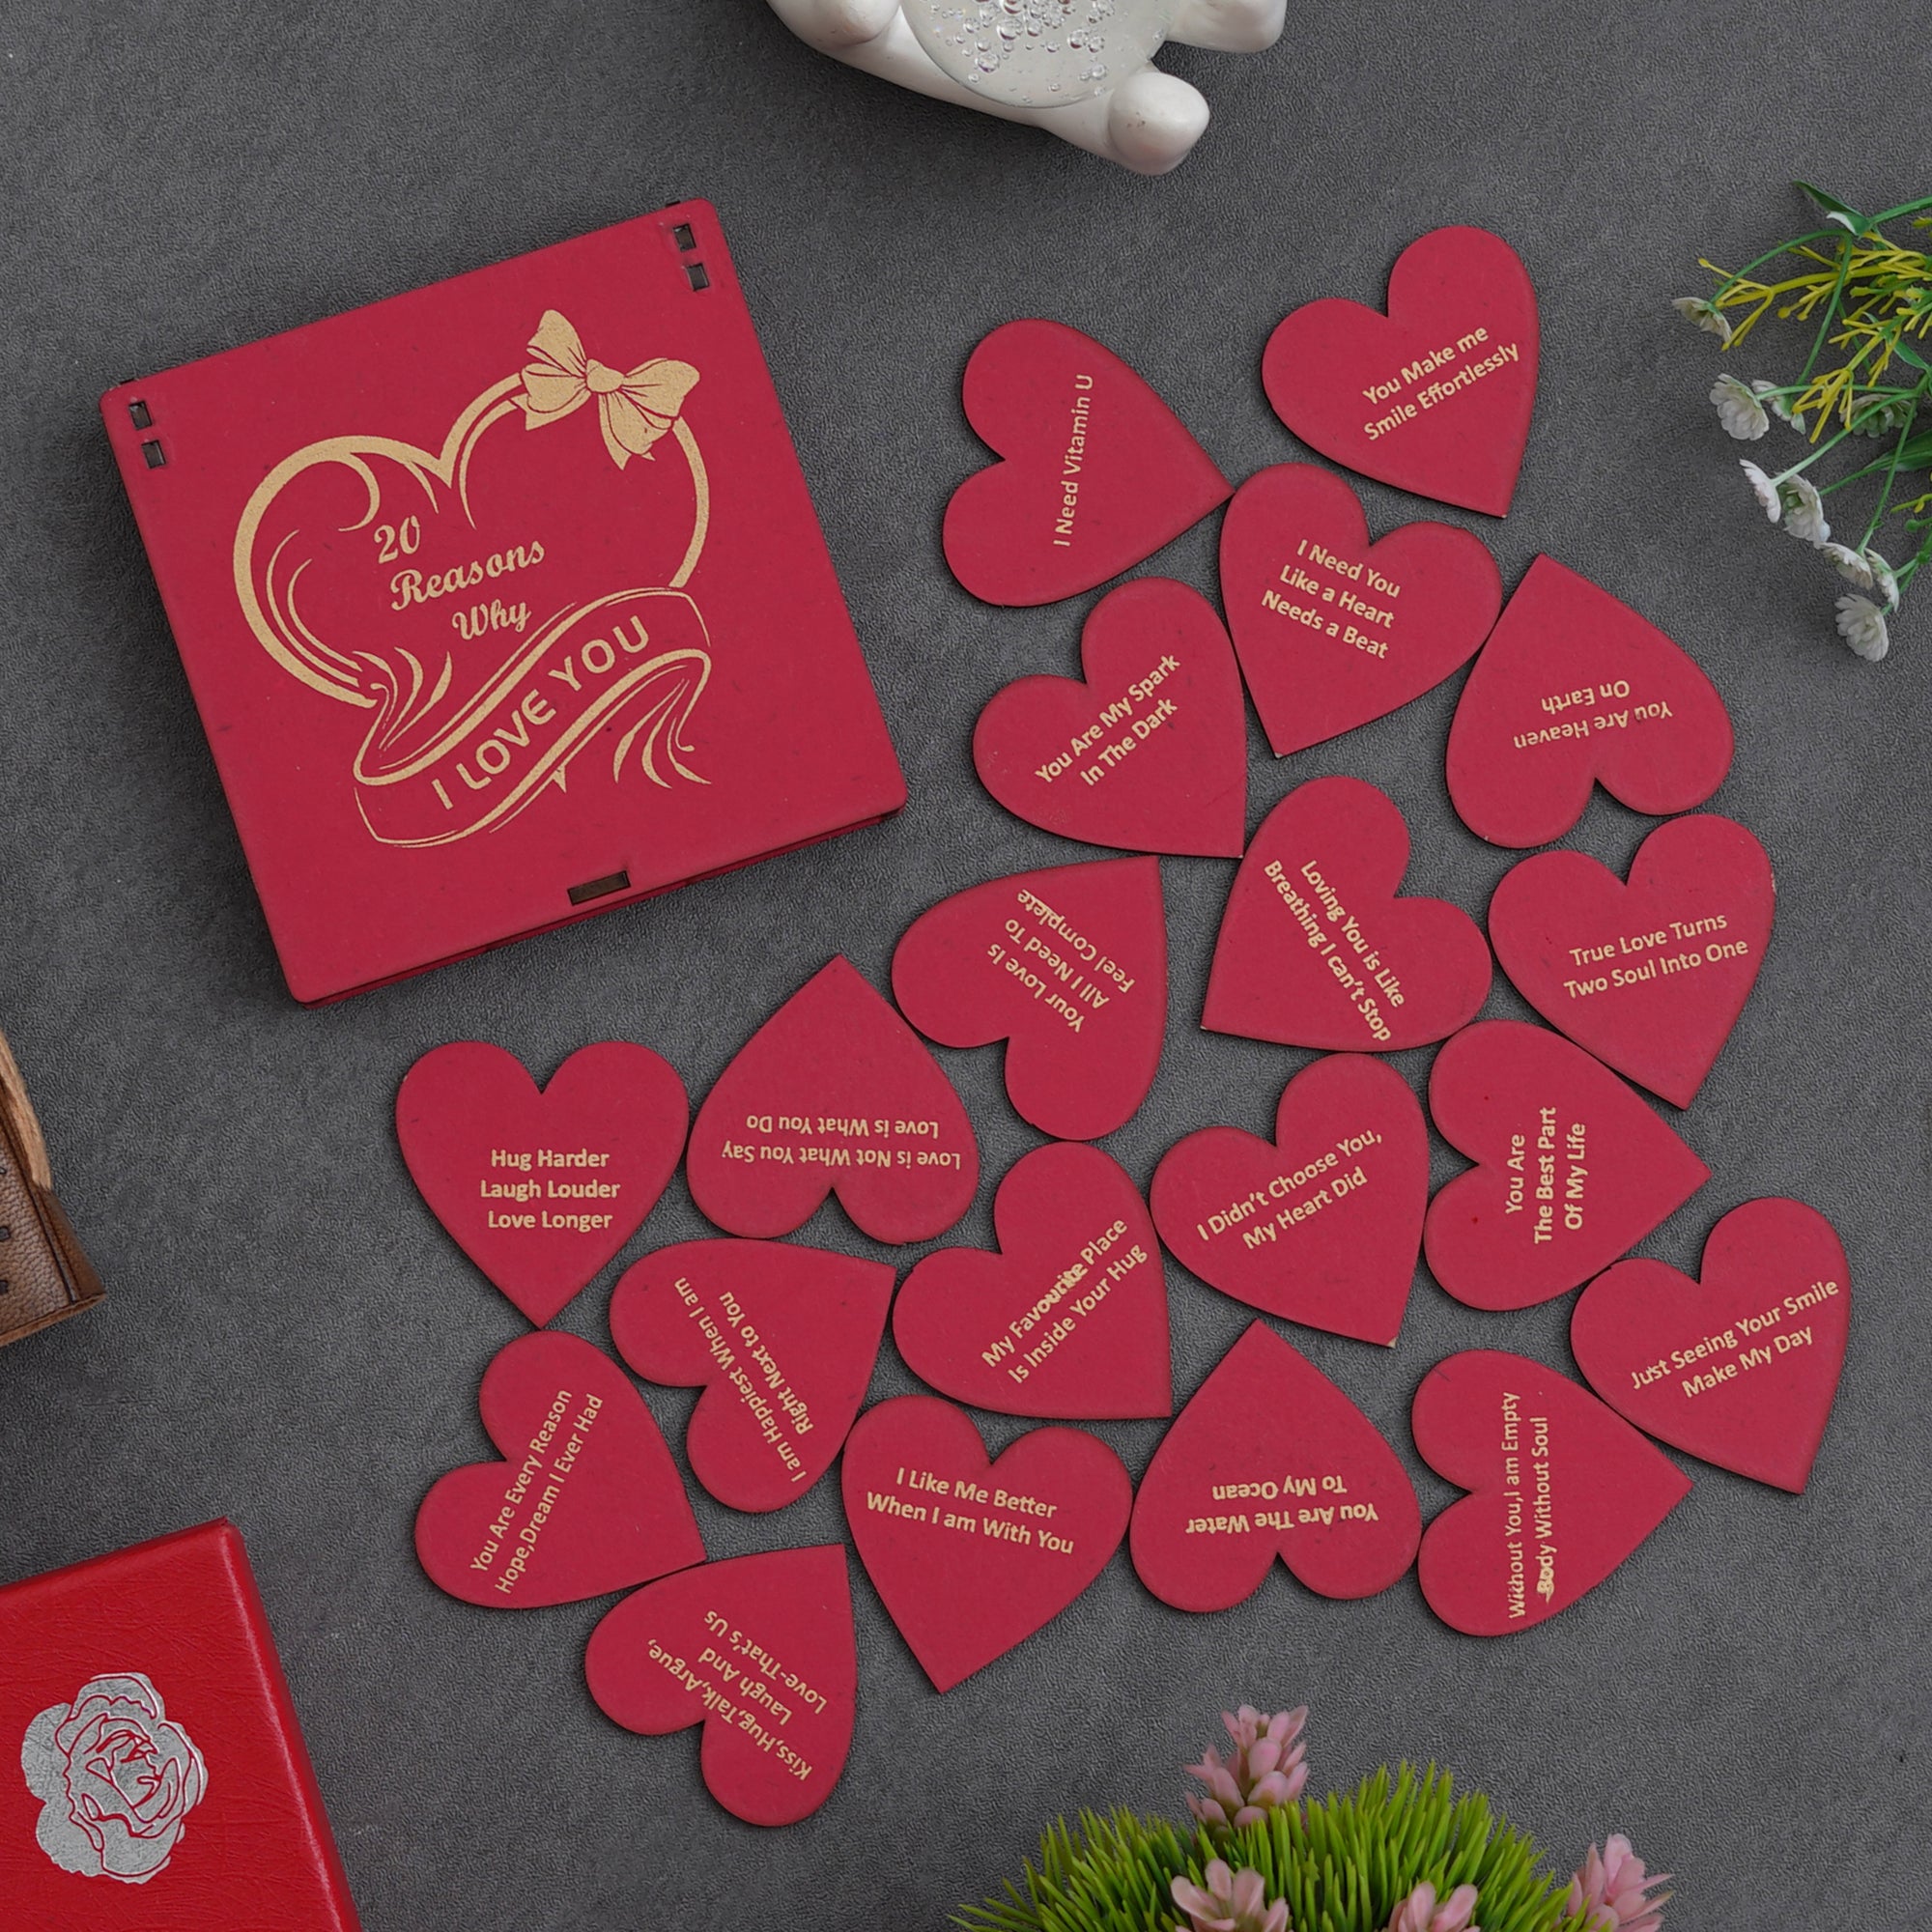 Valentine Combo of Pack of 8 Love Gift Cards, Golden Rose Gift Set, "20 Reasons Why I Love You" Printed on Little Red Hearts Decorative Wooden Gift Set Box 5